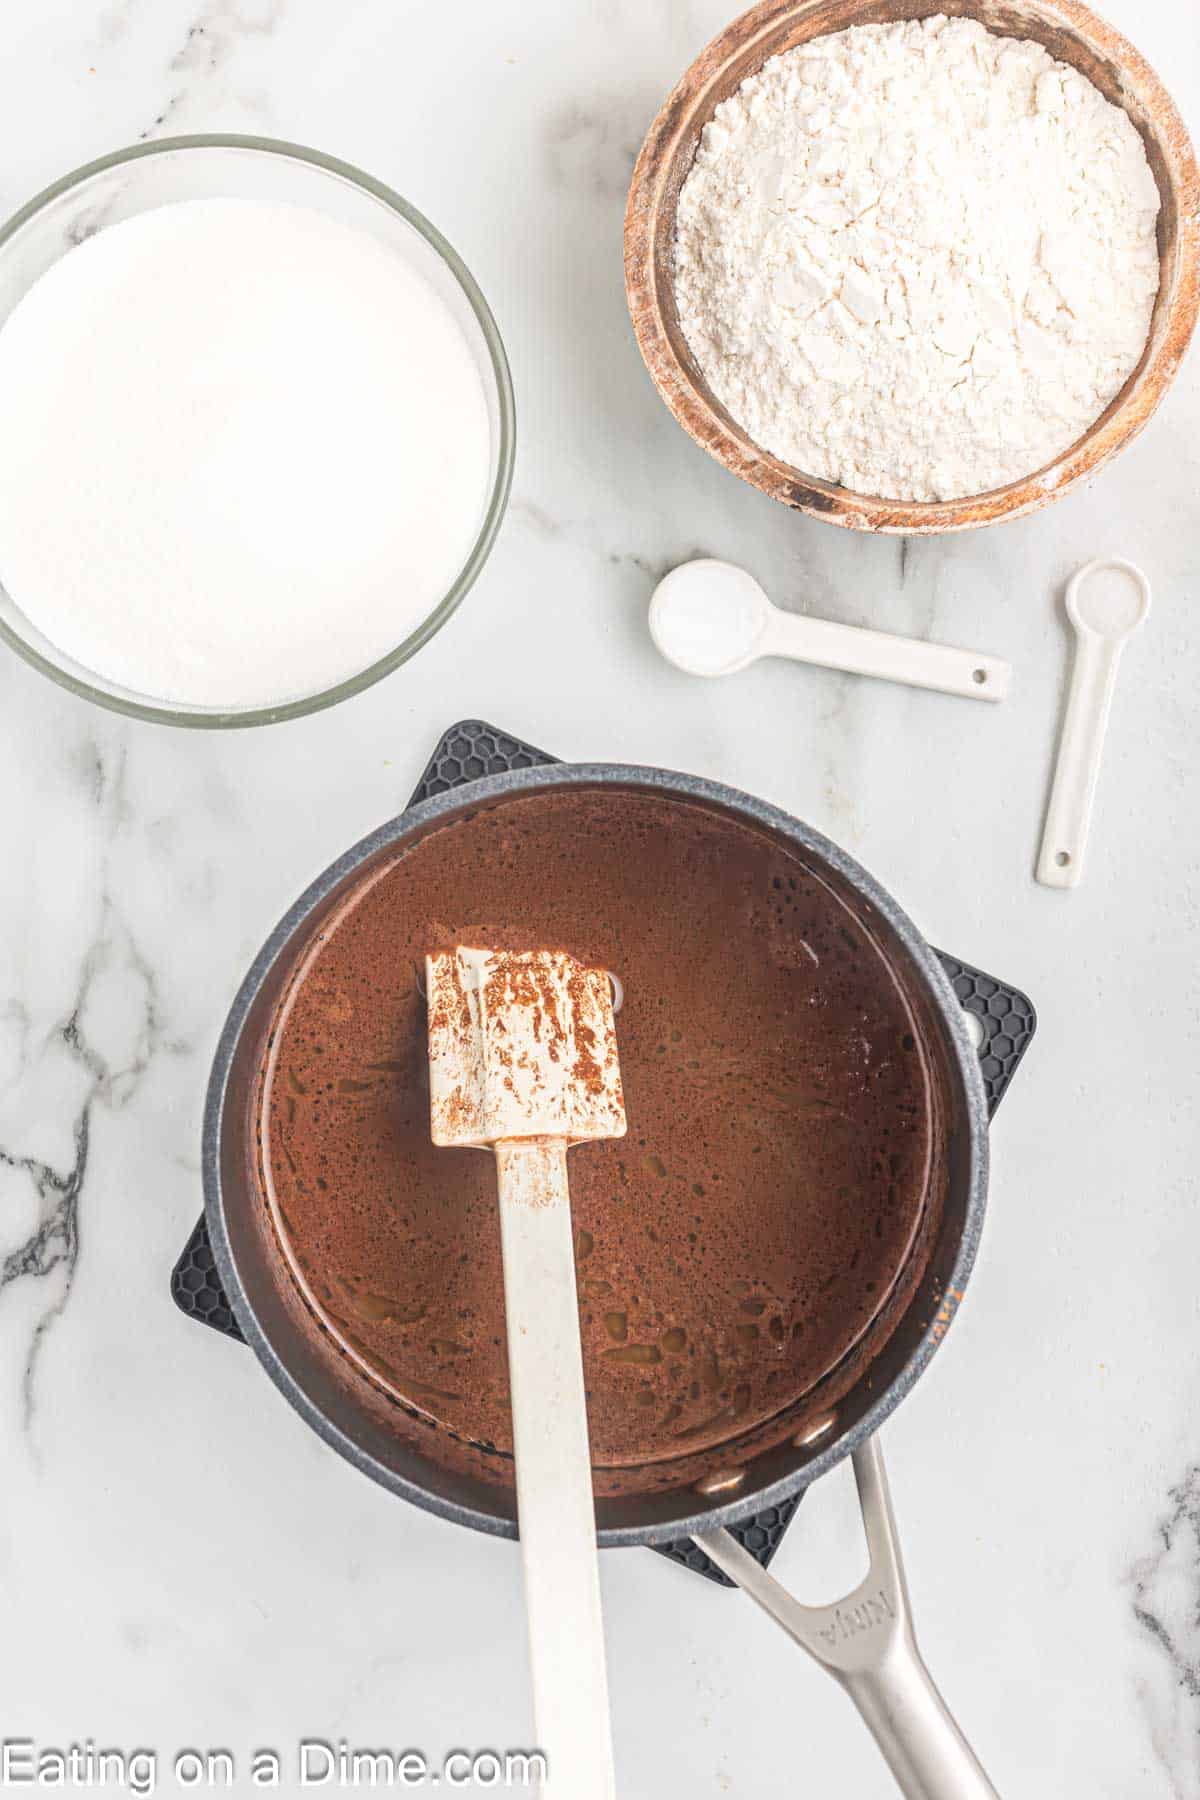 In a sauce pan mix together butter, cocoa powder, water